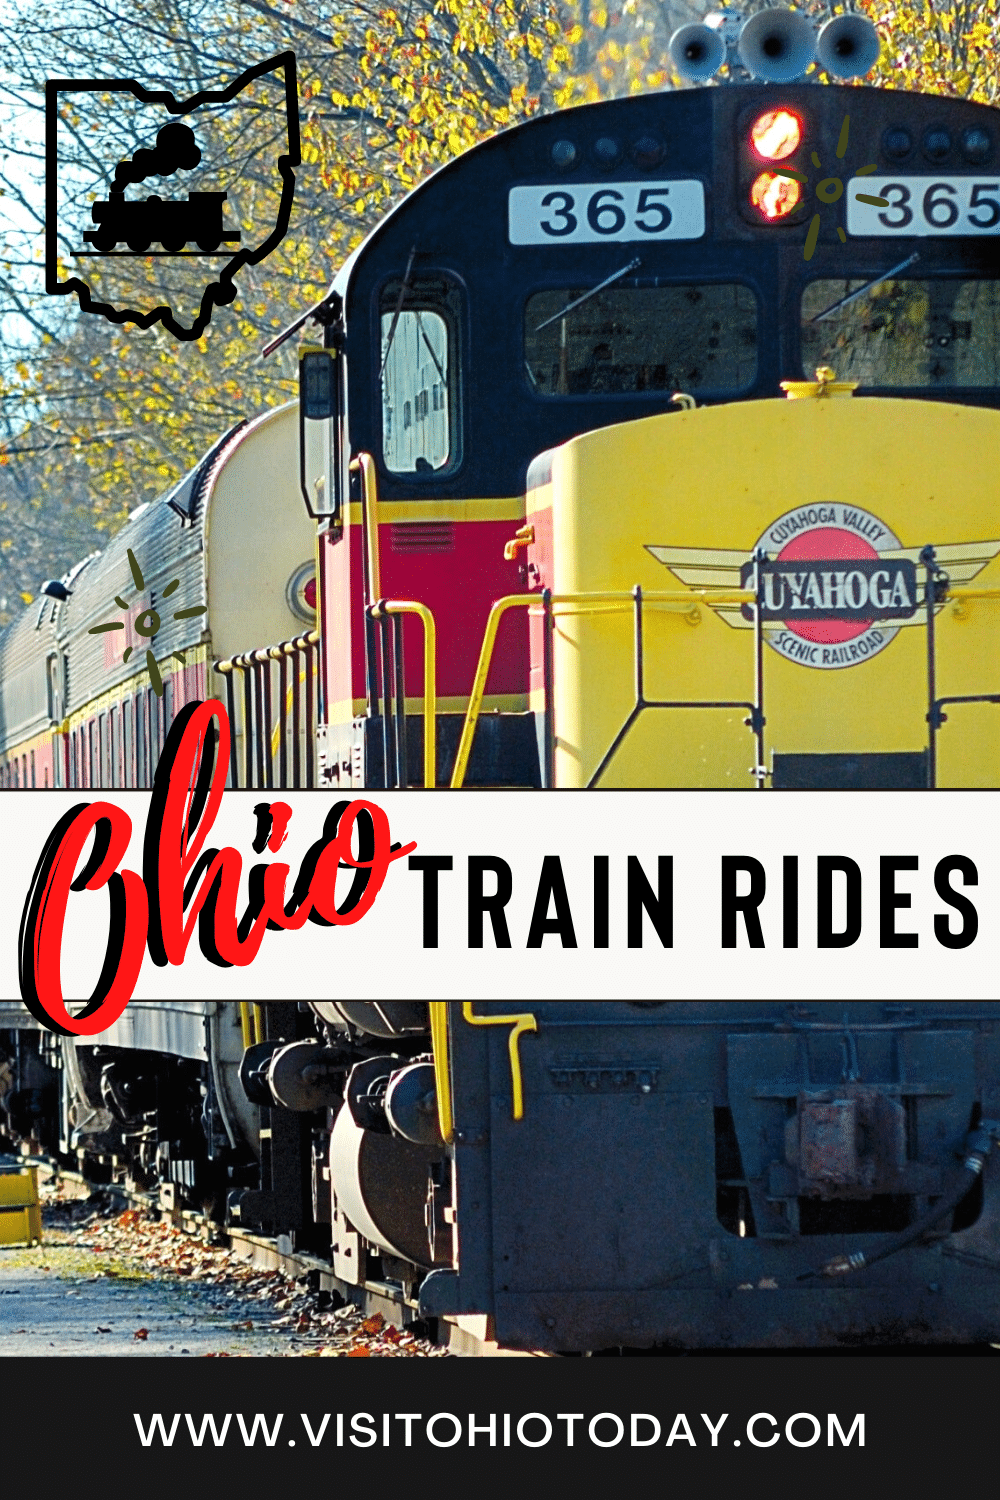 train rides in ohio yellow and black train on track with text overlay: Ohio Train Rides